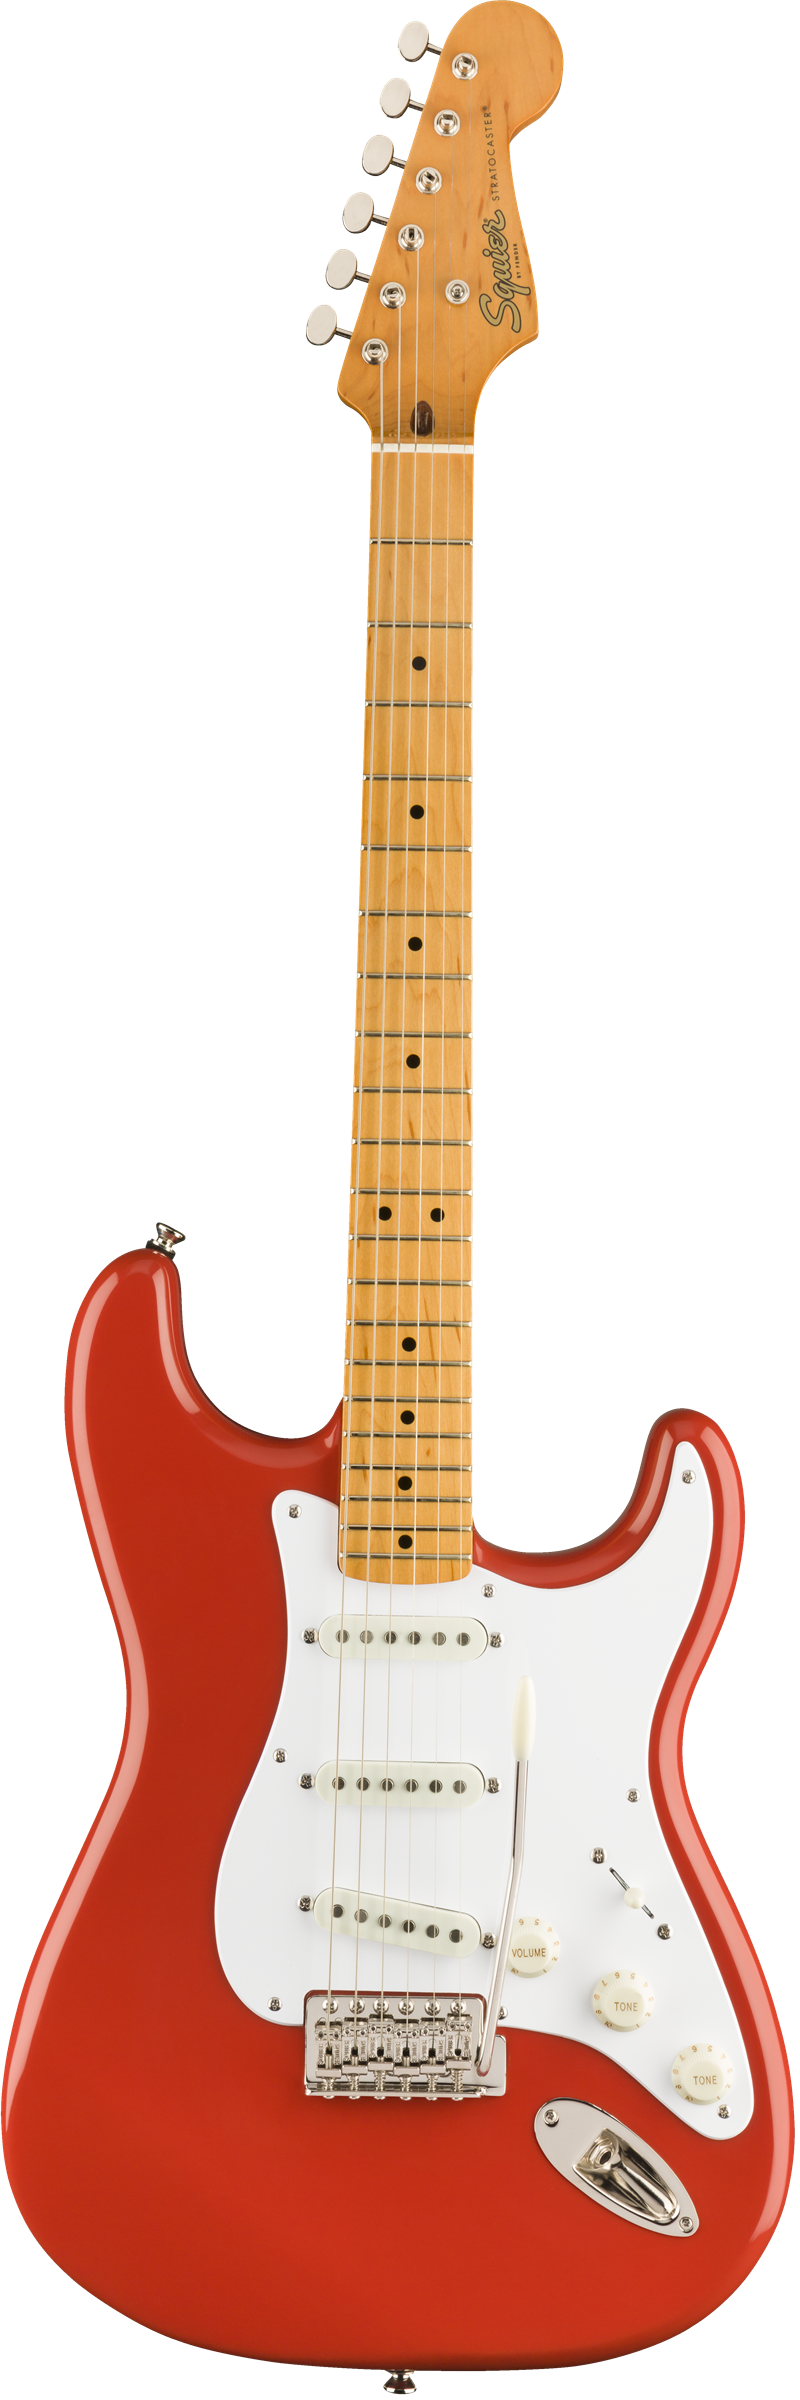 Stratocaster Classic Vibe 50s FRD MN Fiesta Red